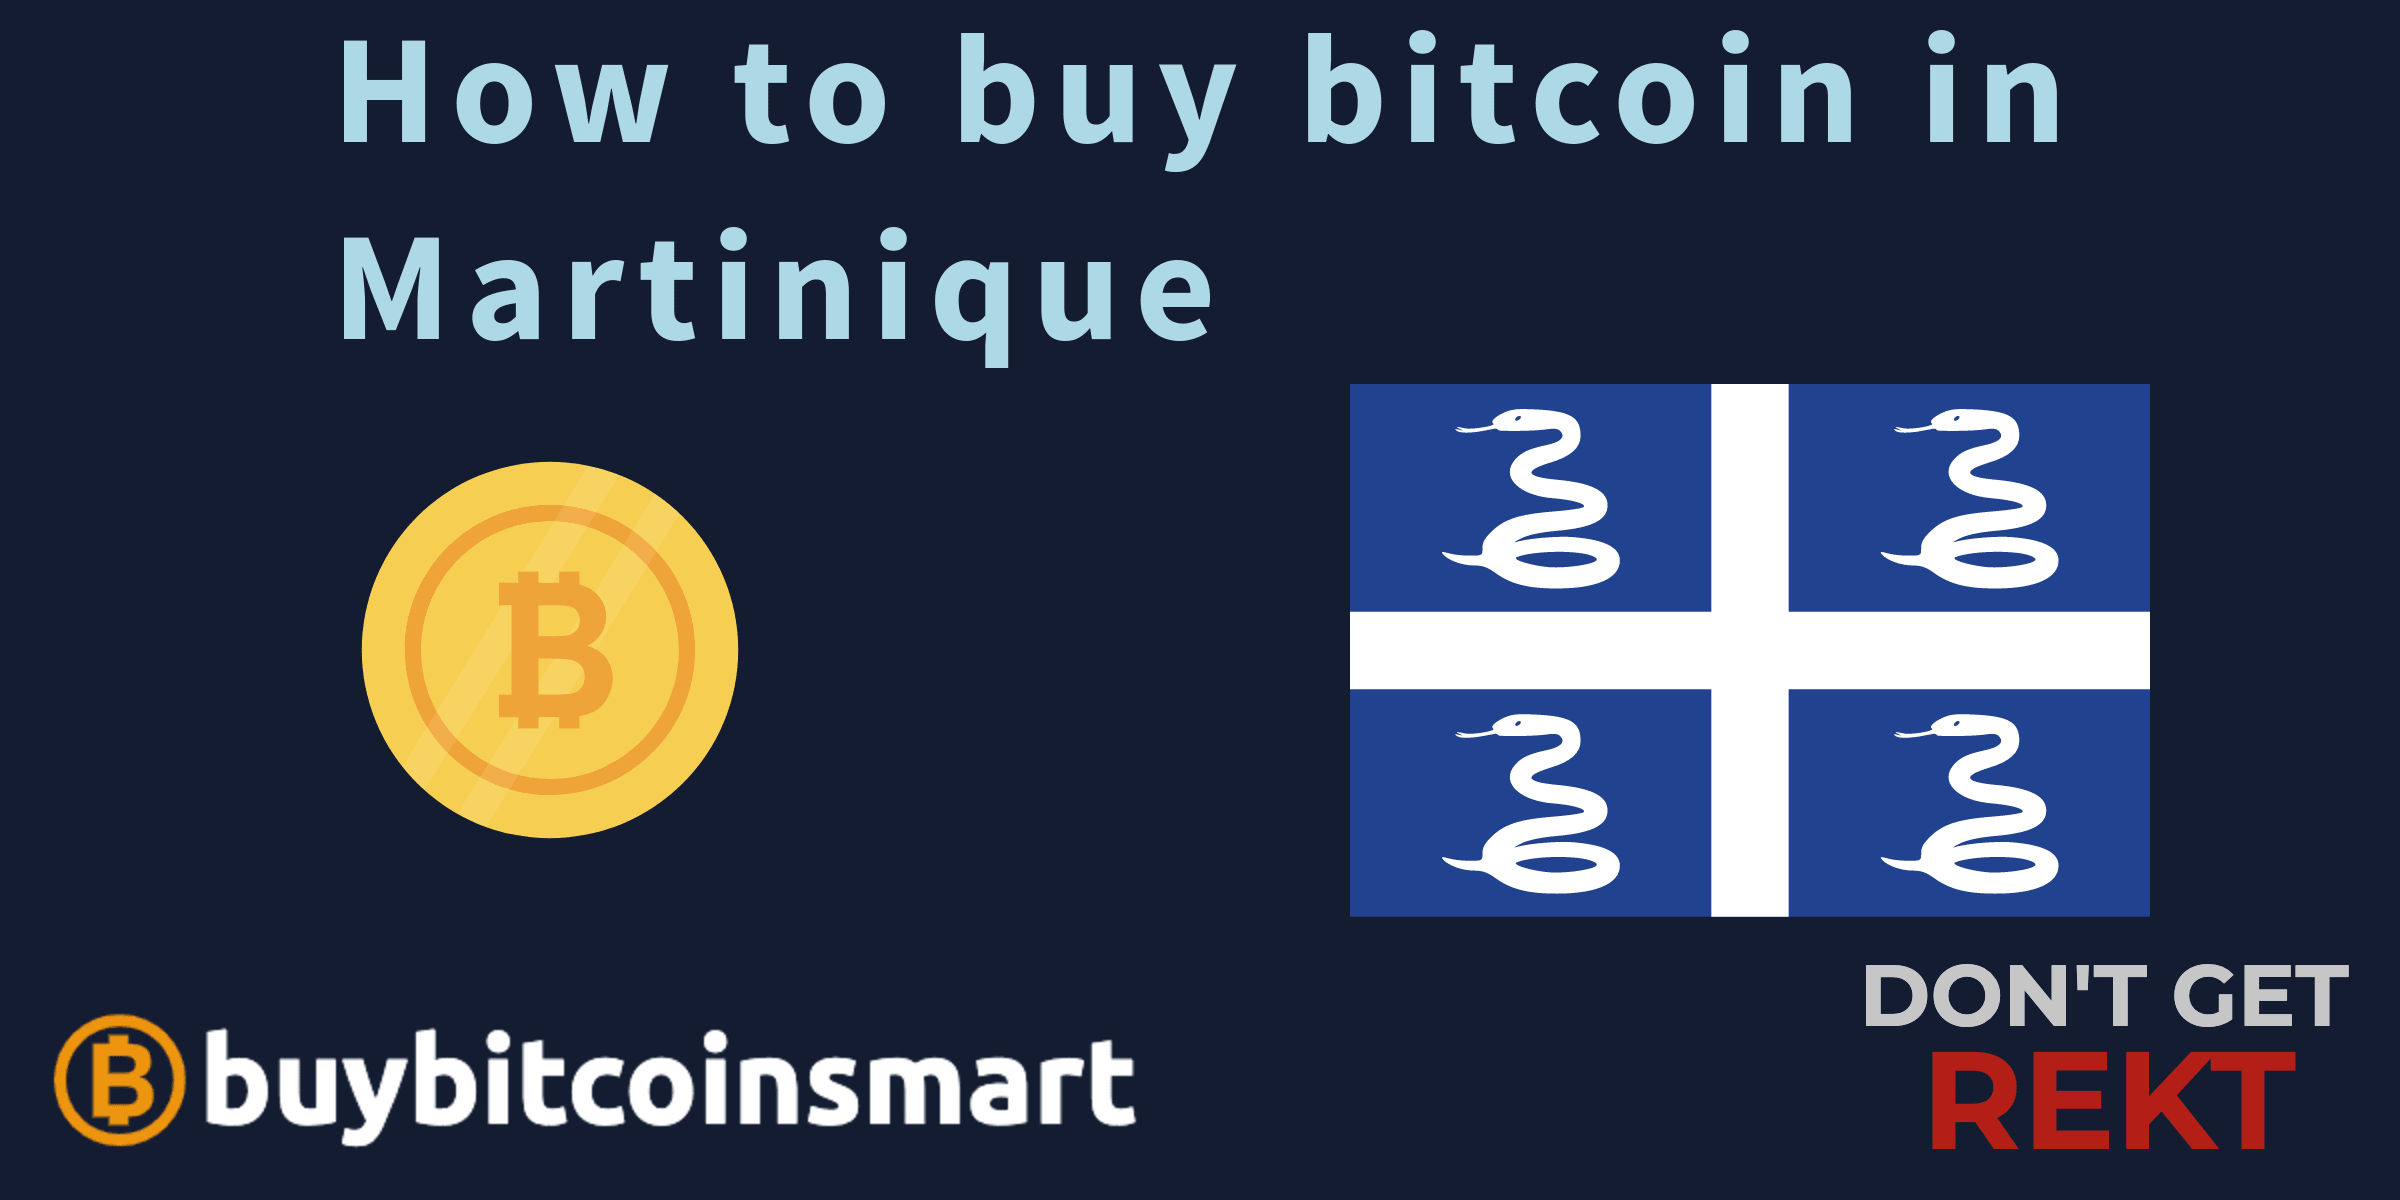 How to buy bitcoin in Martinique